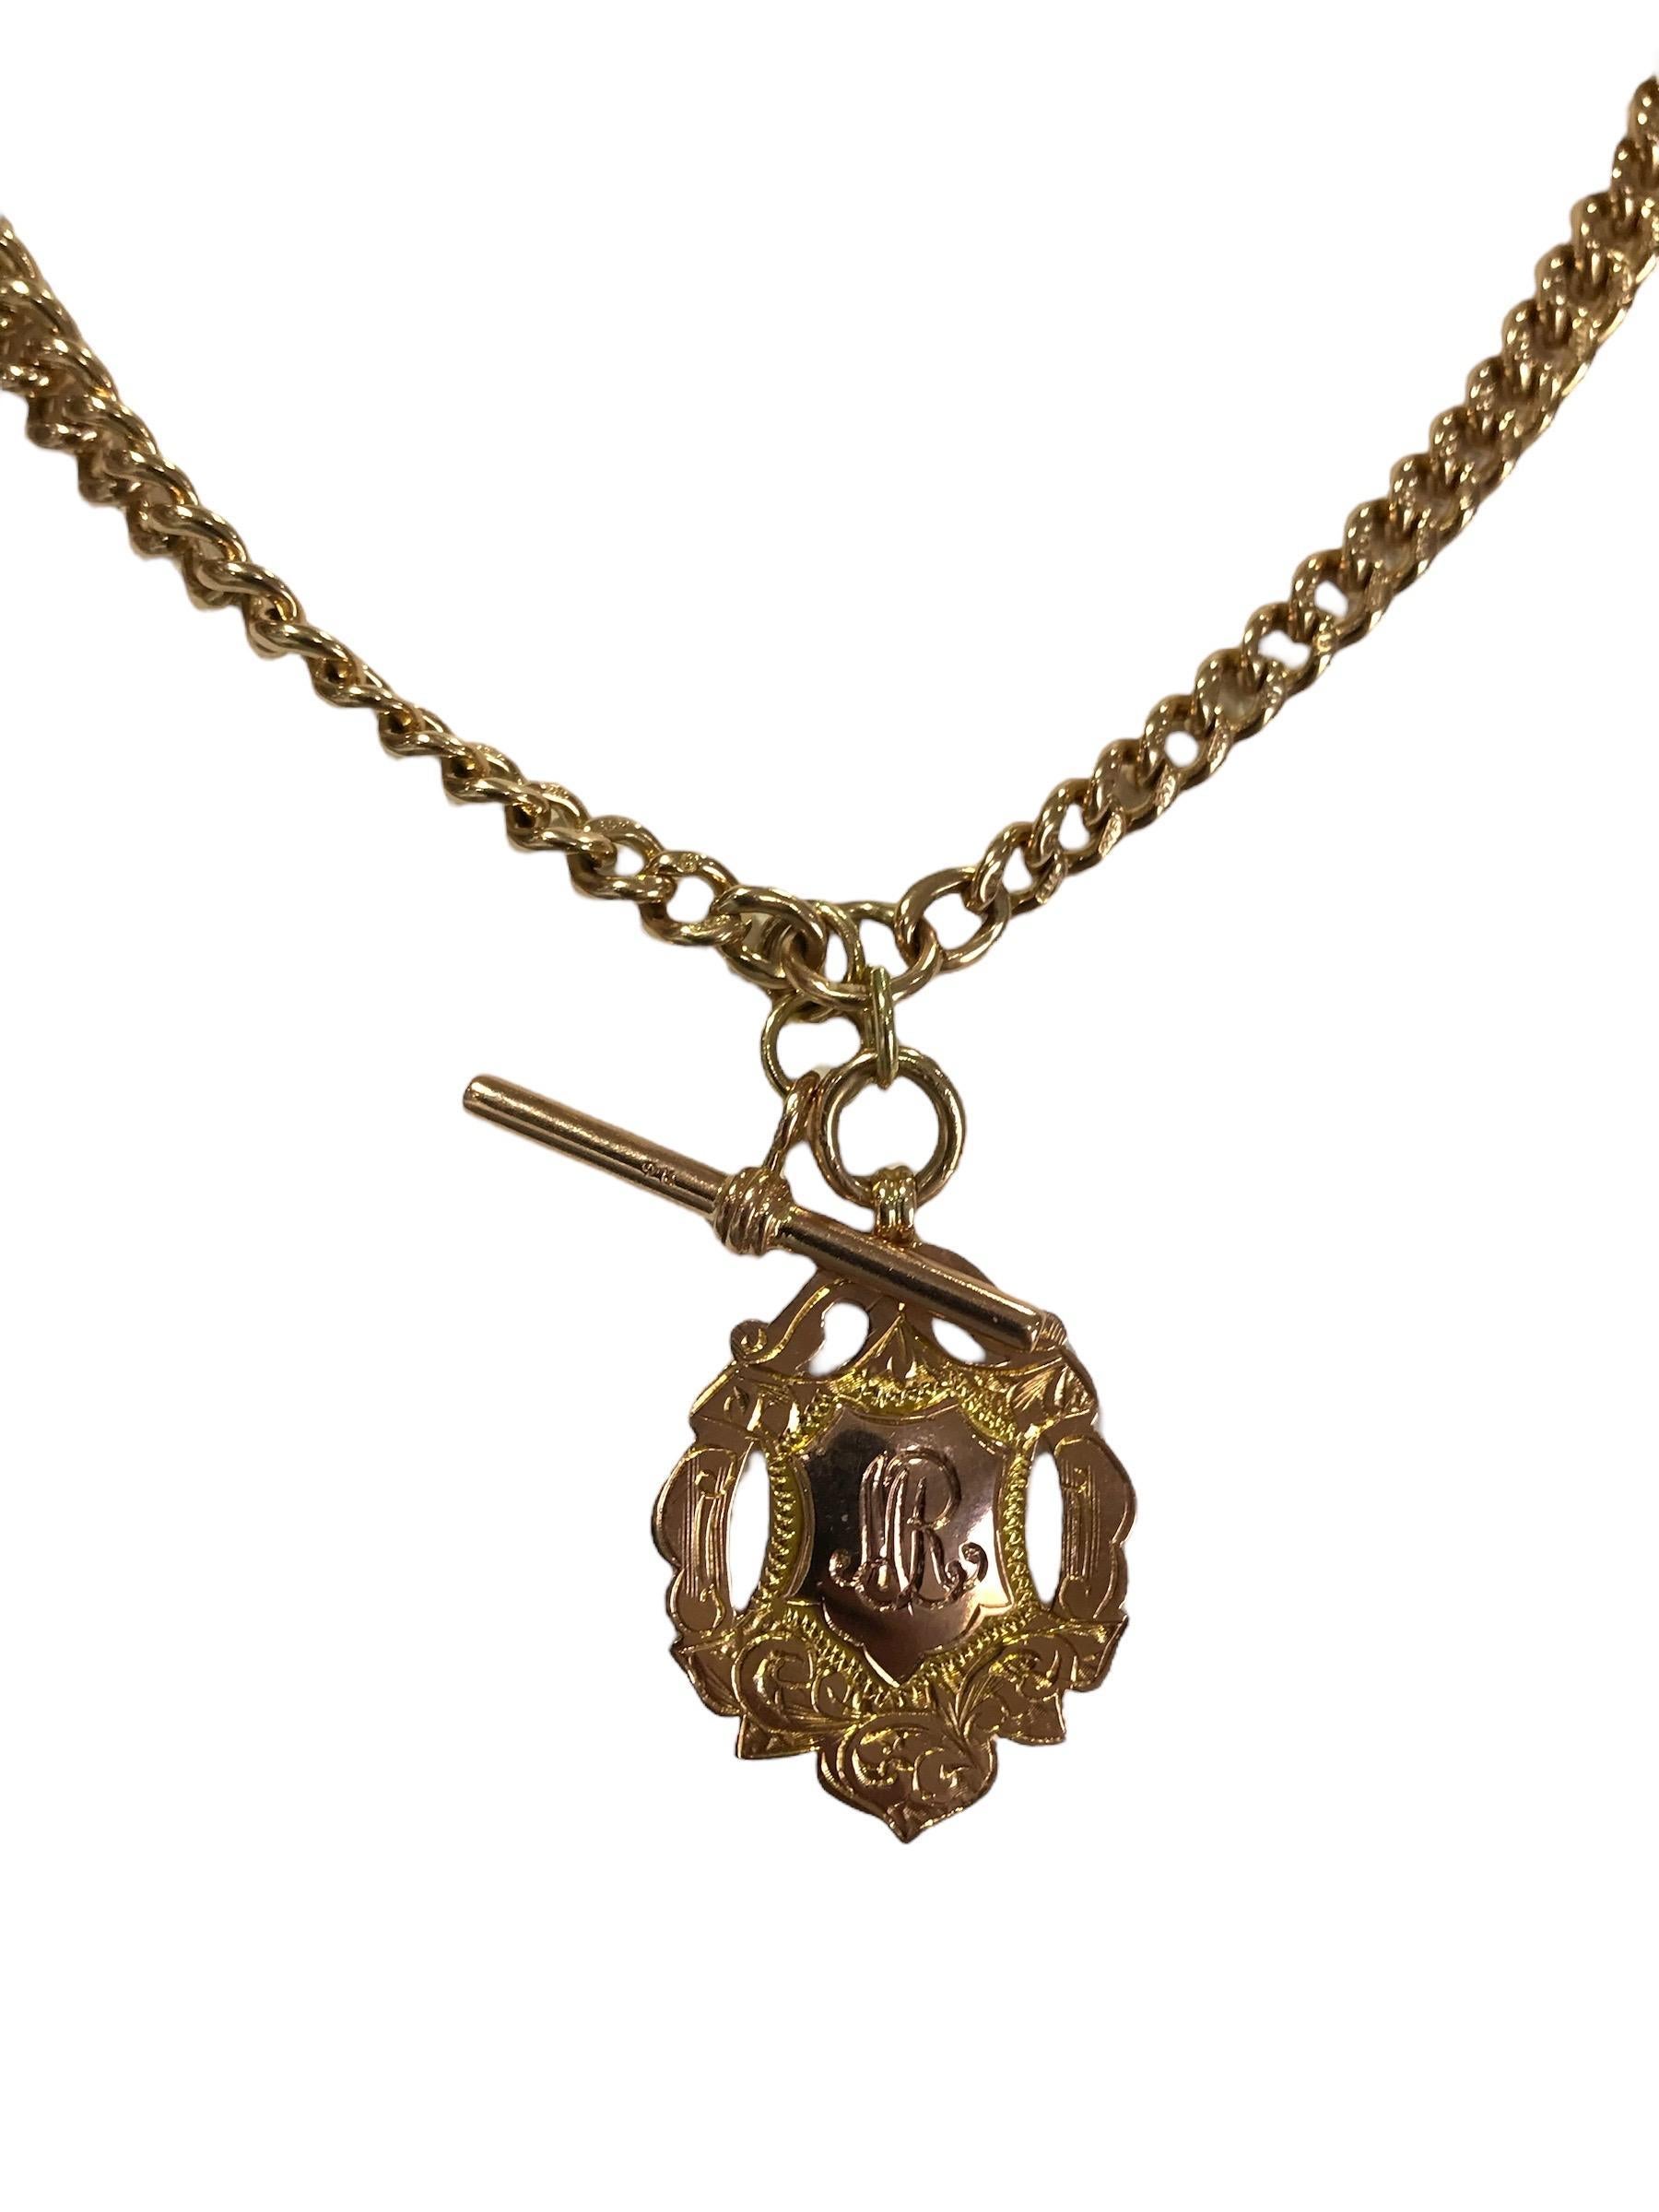 Victorian Era Watch Chain Toggle Necklace 9K Rose Gold For Sale 3